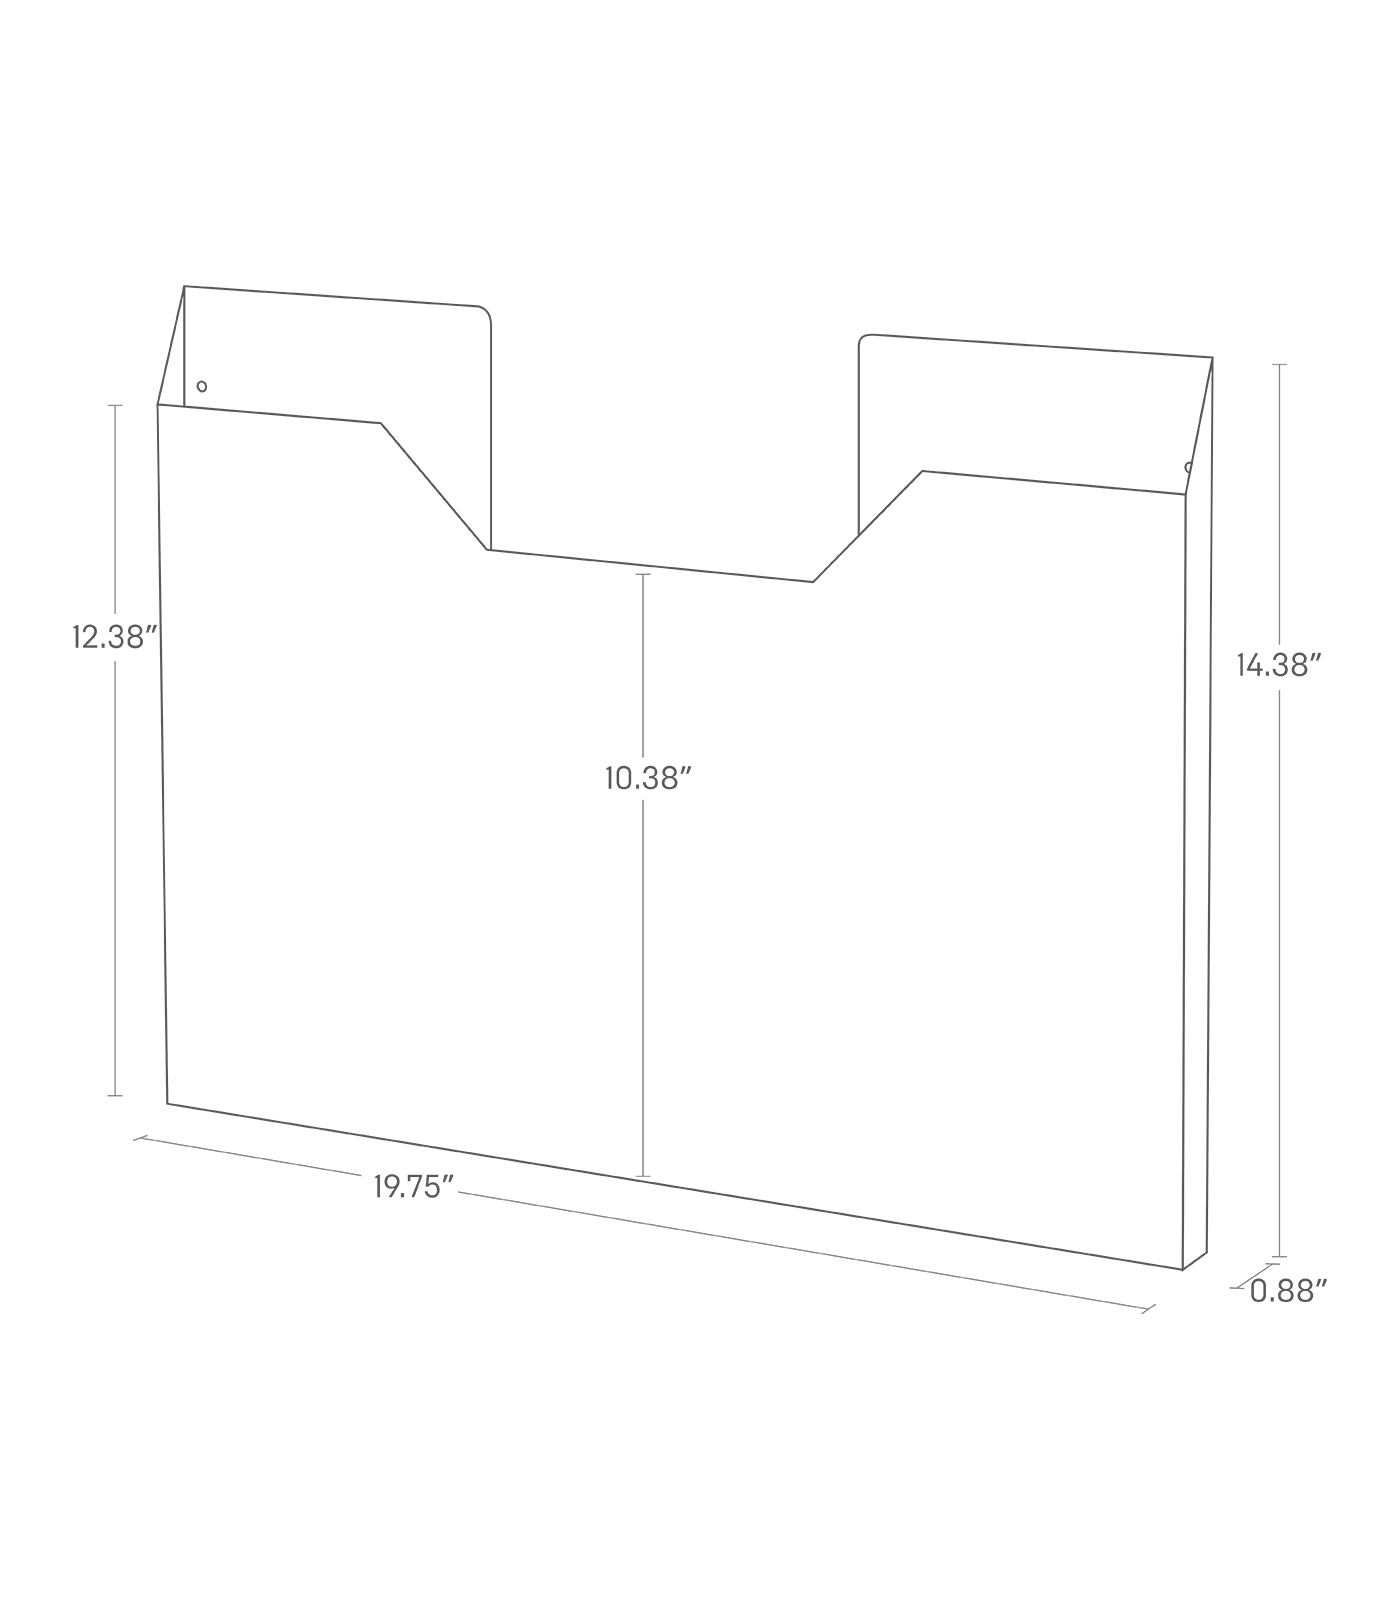 Dimension image for Magnetic Placemat Organizer showing total height of 17